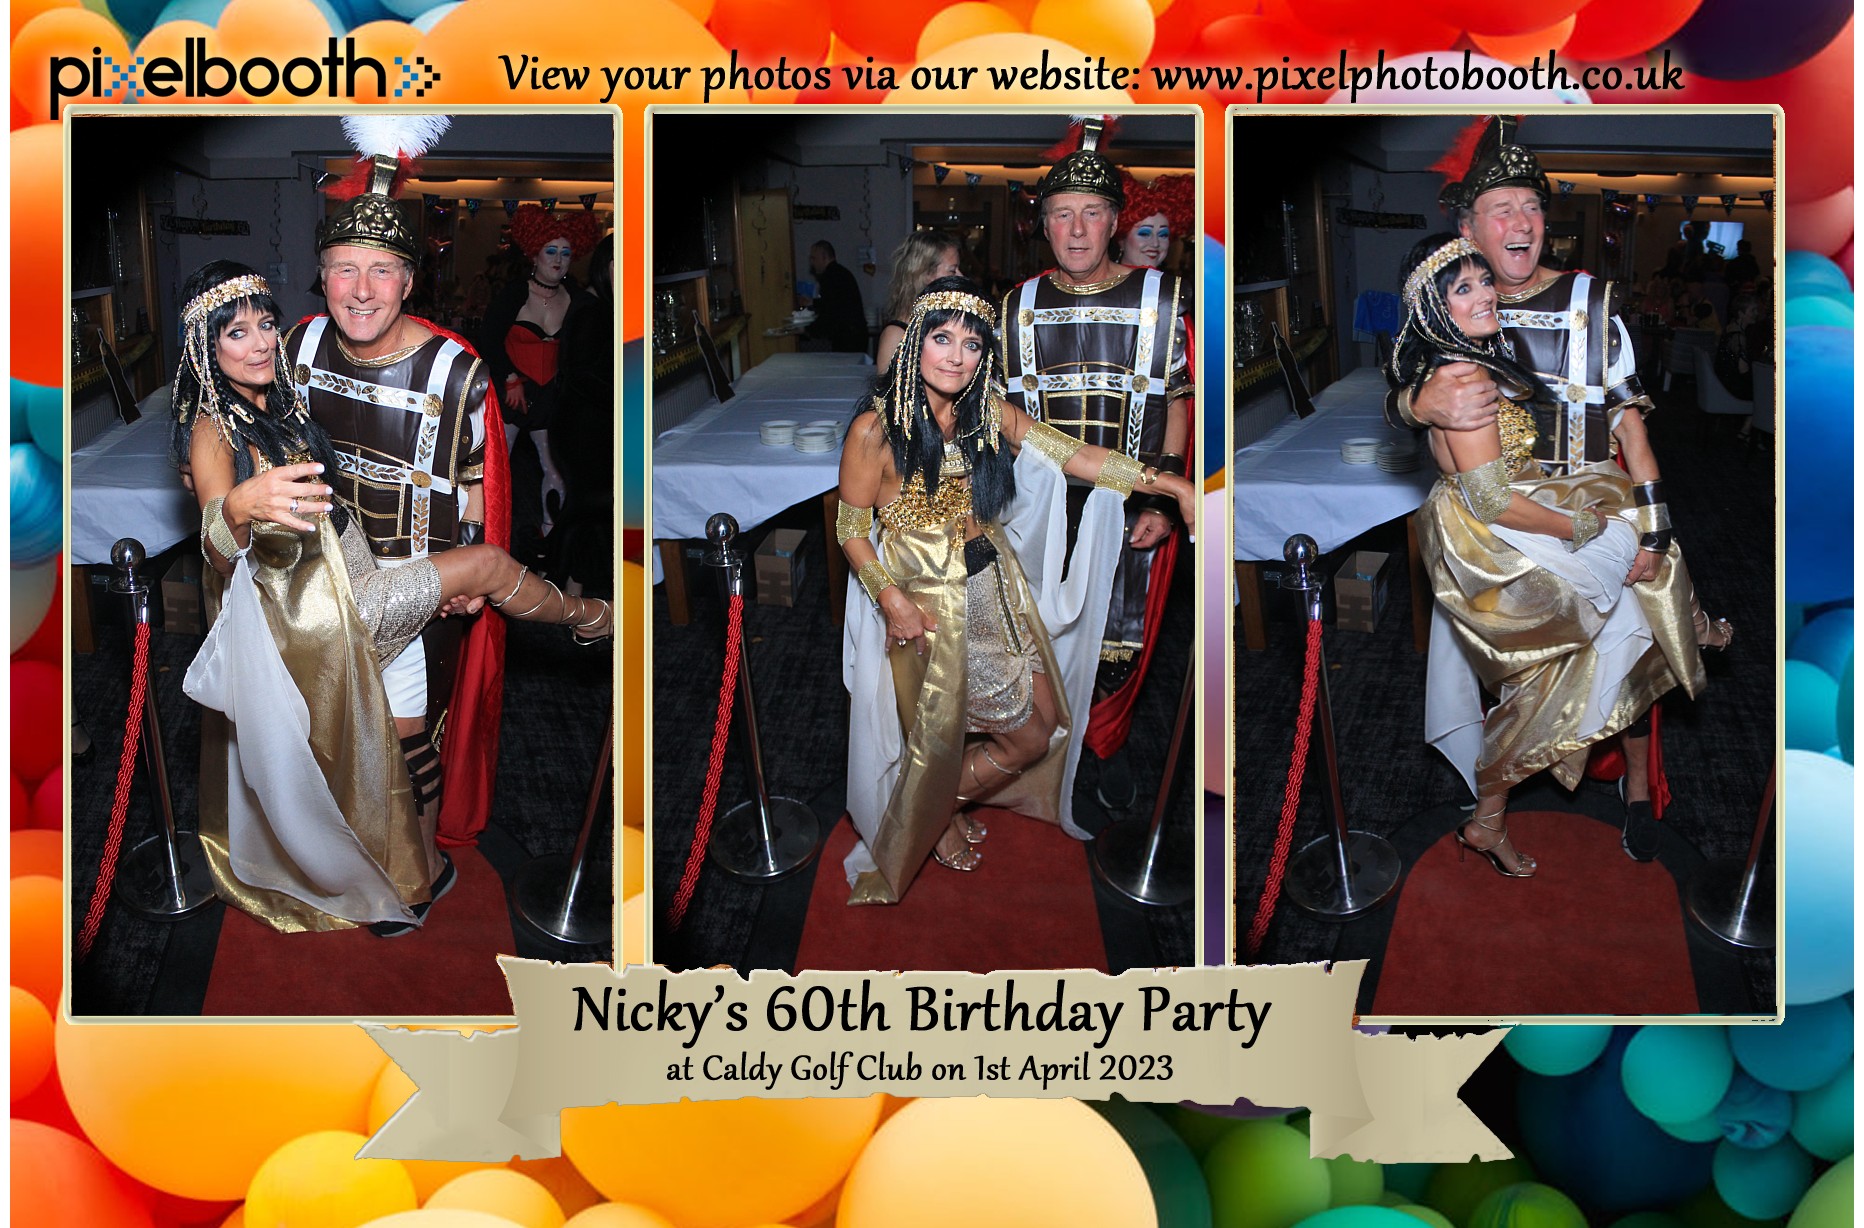 1st April 2023: 60th Birthday for Nicky at Caldy Golf Club